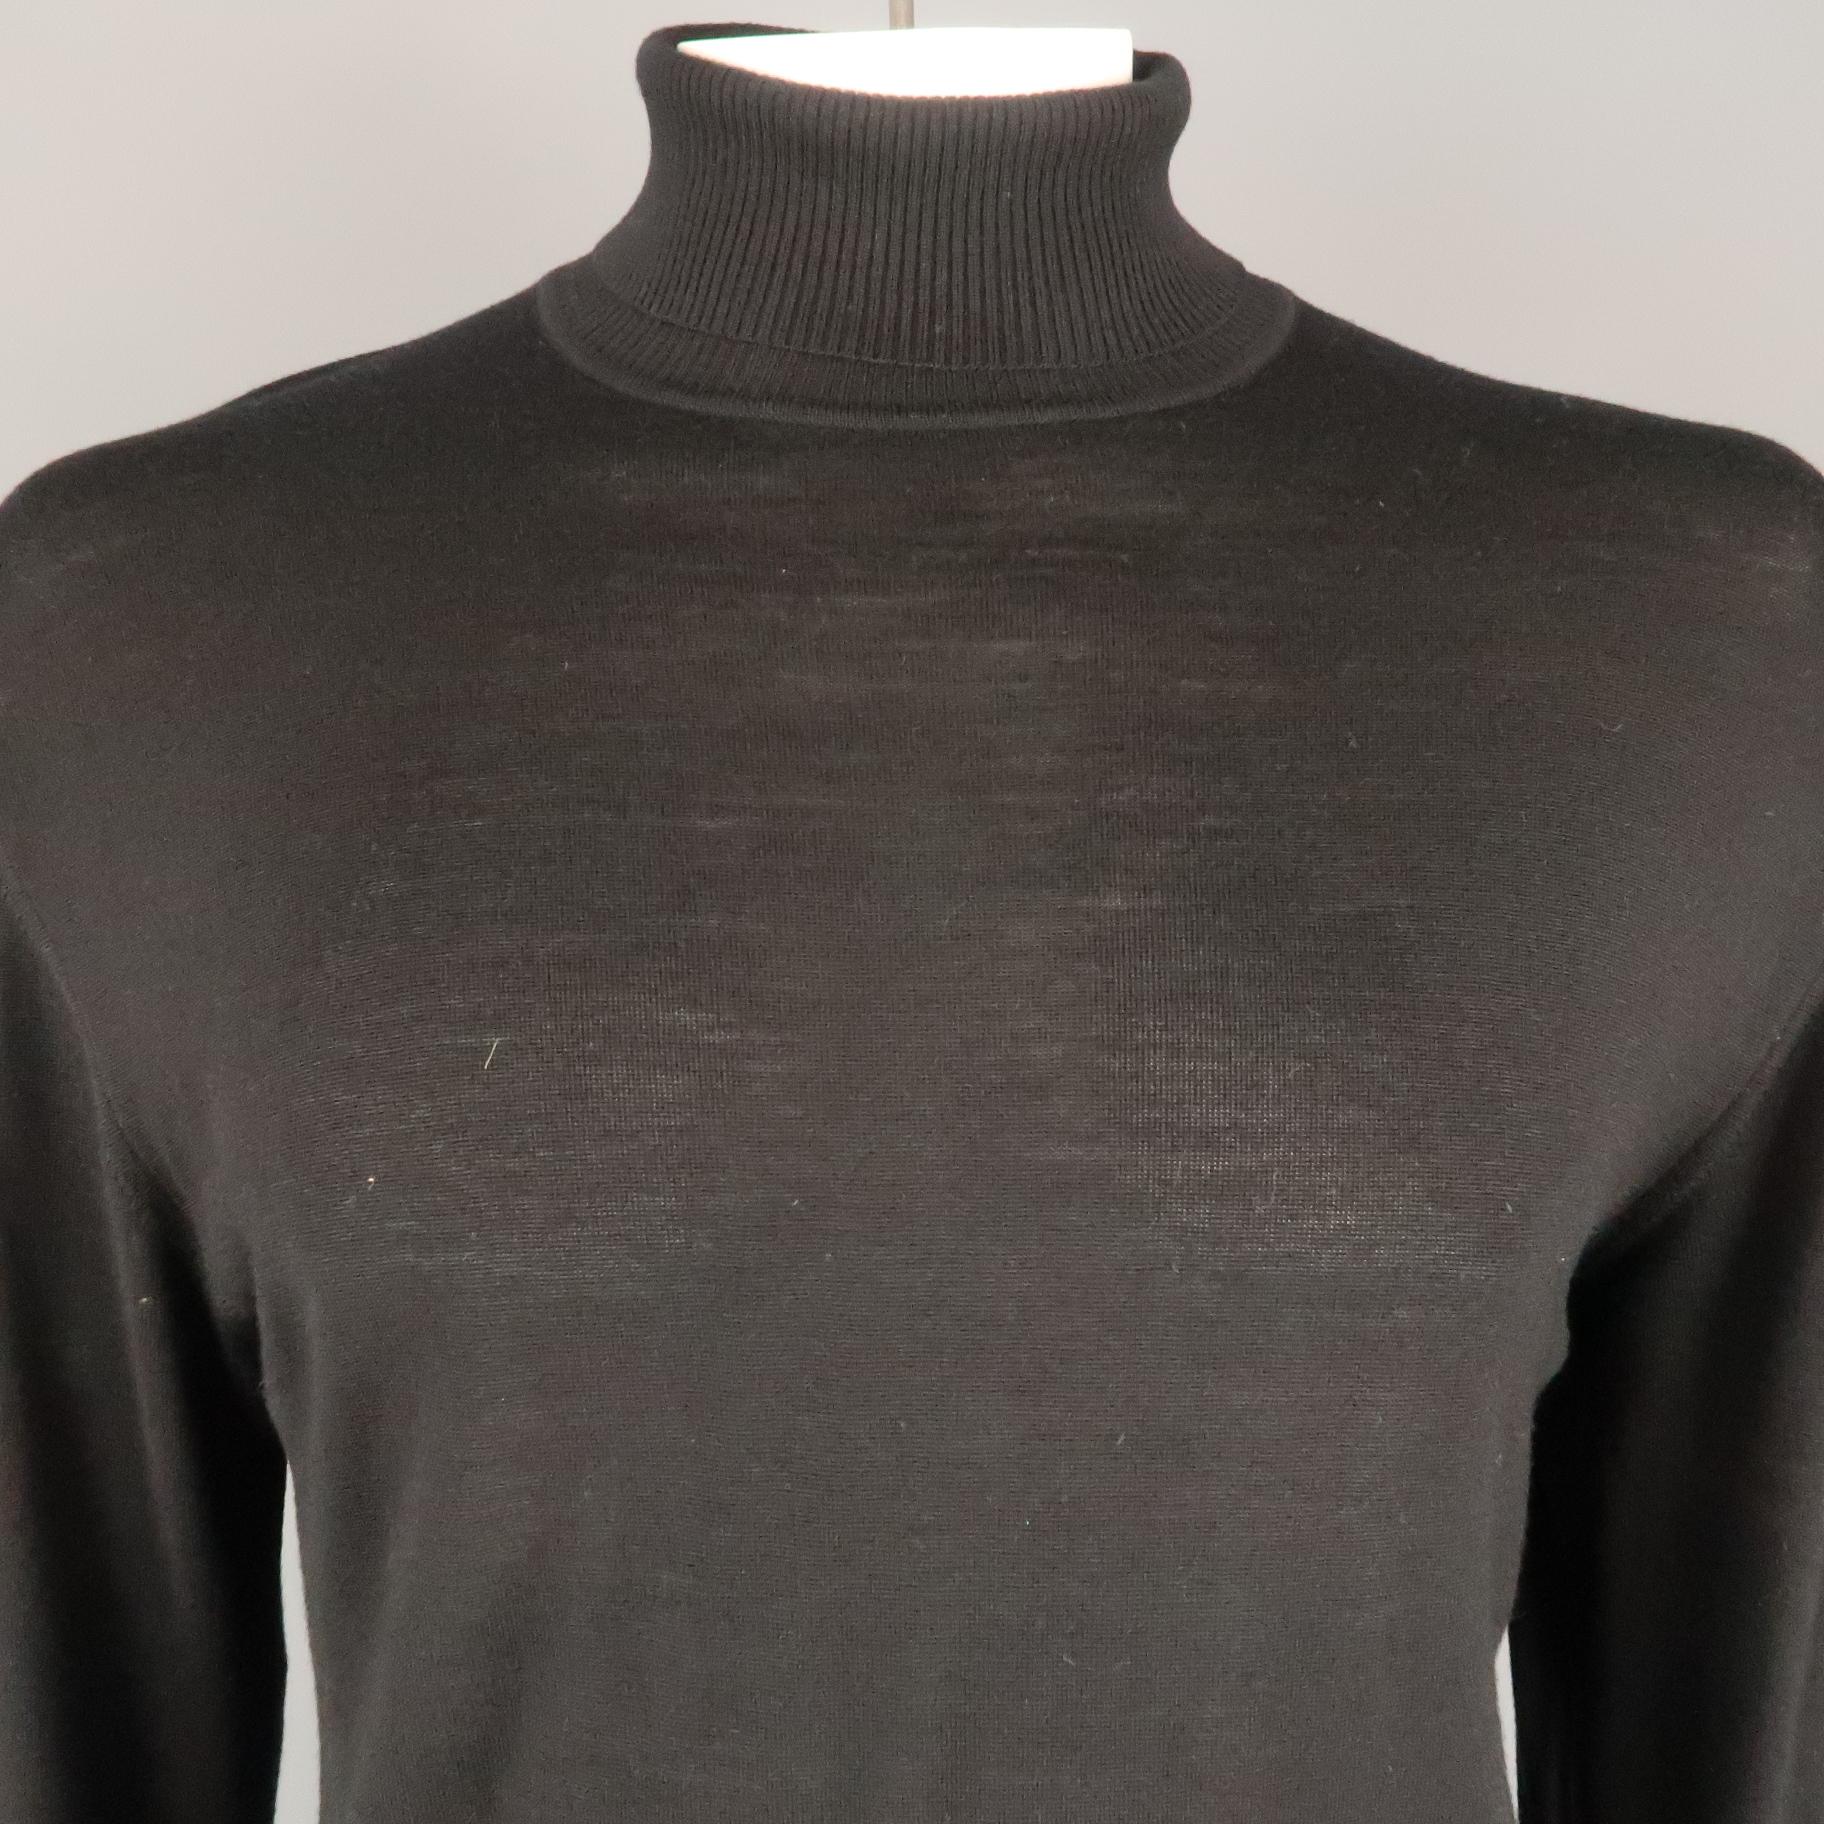 BRIONI pullover comes in a black wool featuring a turtleneck style. Made in Italy.
 
Excellent Pre-Owned Condition.
Marked: IT 52
 
Measurements:
 
Shoulder: 21 in.
Chest: 48 in.
Sleeve: 27 in.
Length: 26.5 in.